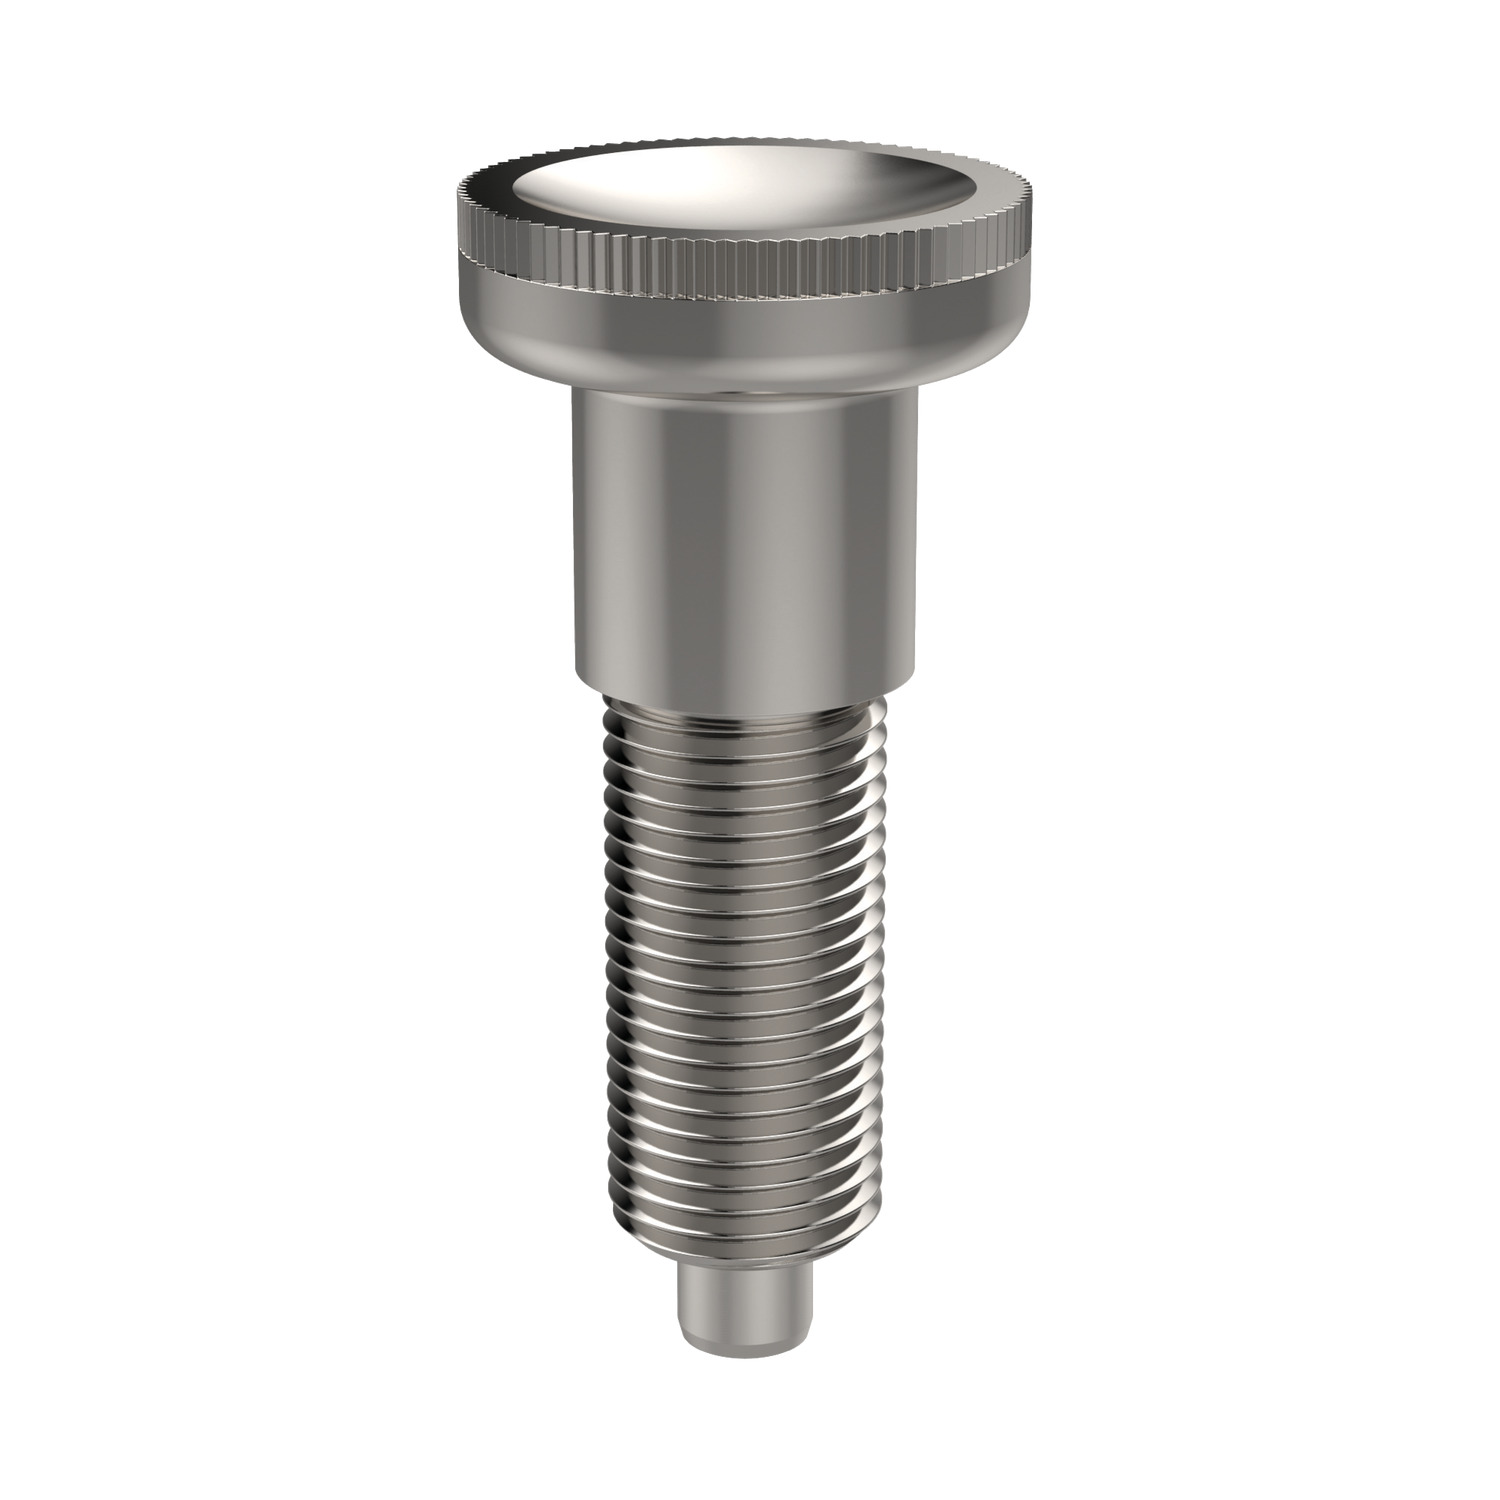 Index Plunger - Pull Grip An all stainless steel index plunger designed for spring-back location. Temperature resistance ranges from -30 °C to +80 °C.